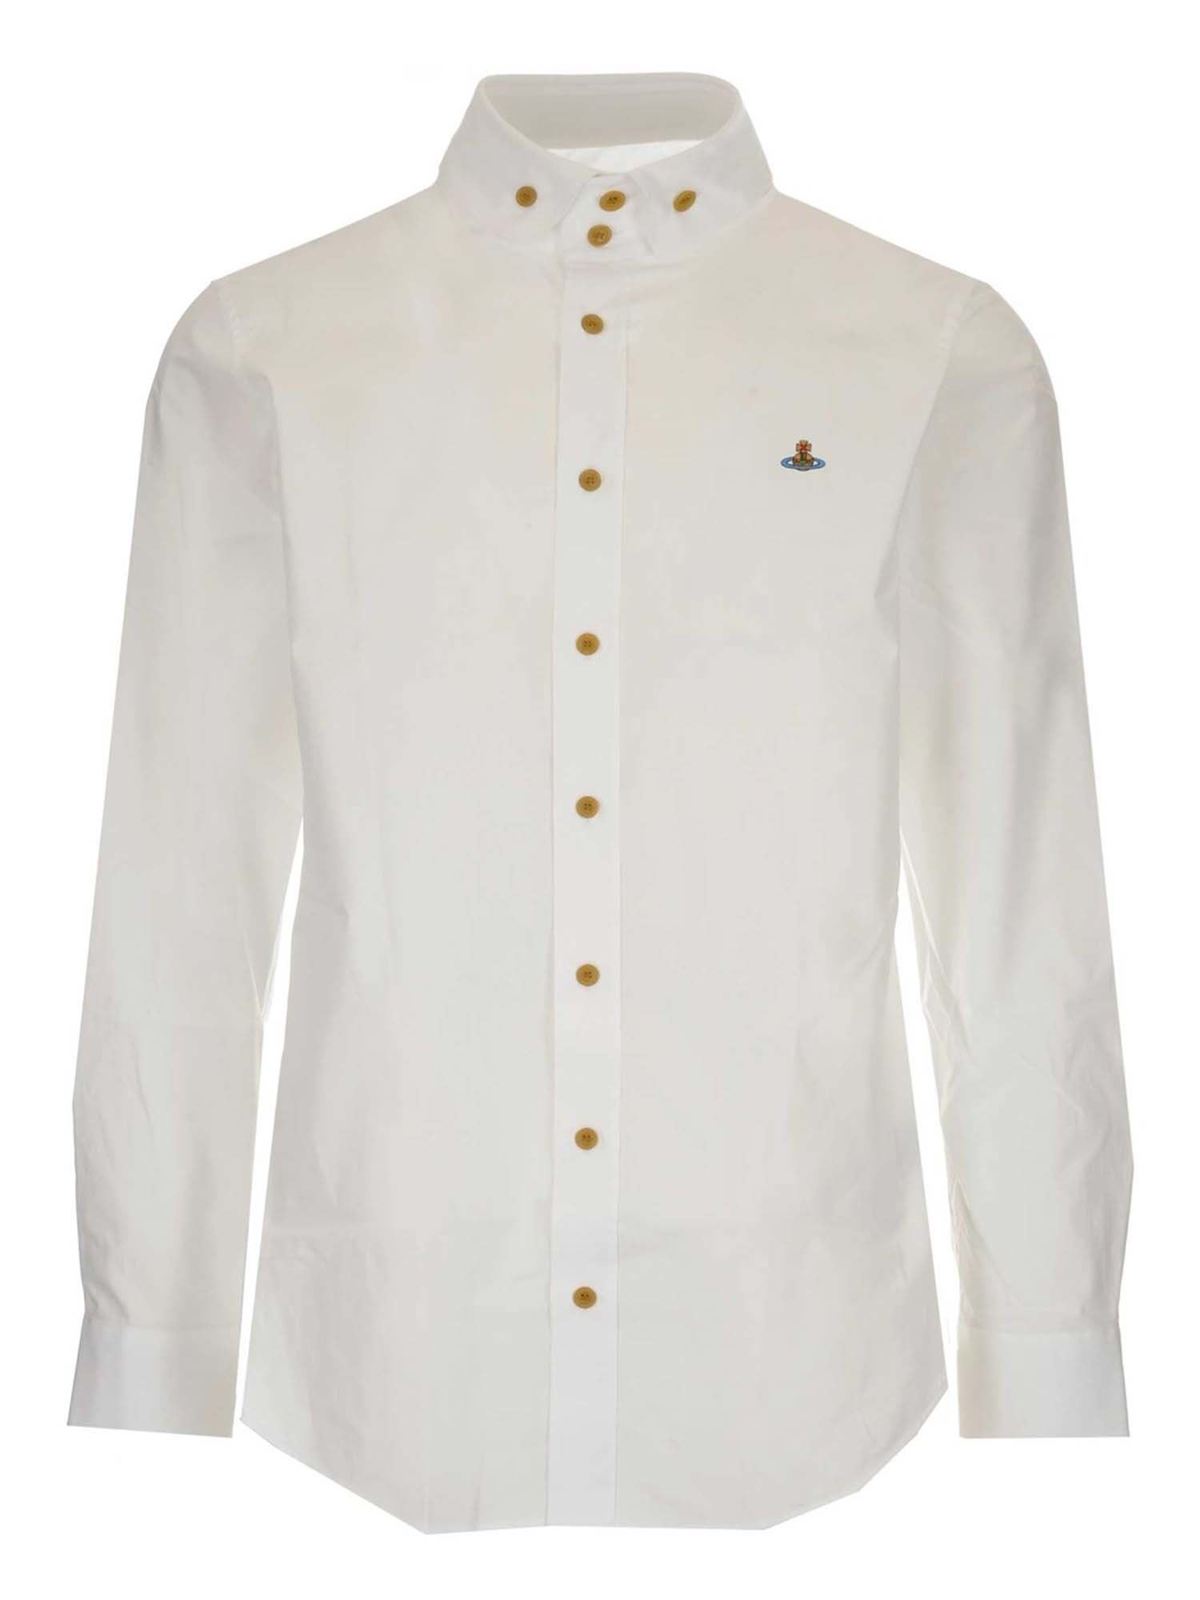 VIVIENNE WESTWOOD ORB LOGO EMBROIDERY SHIRT IN WHITE